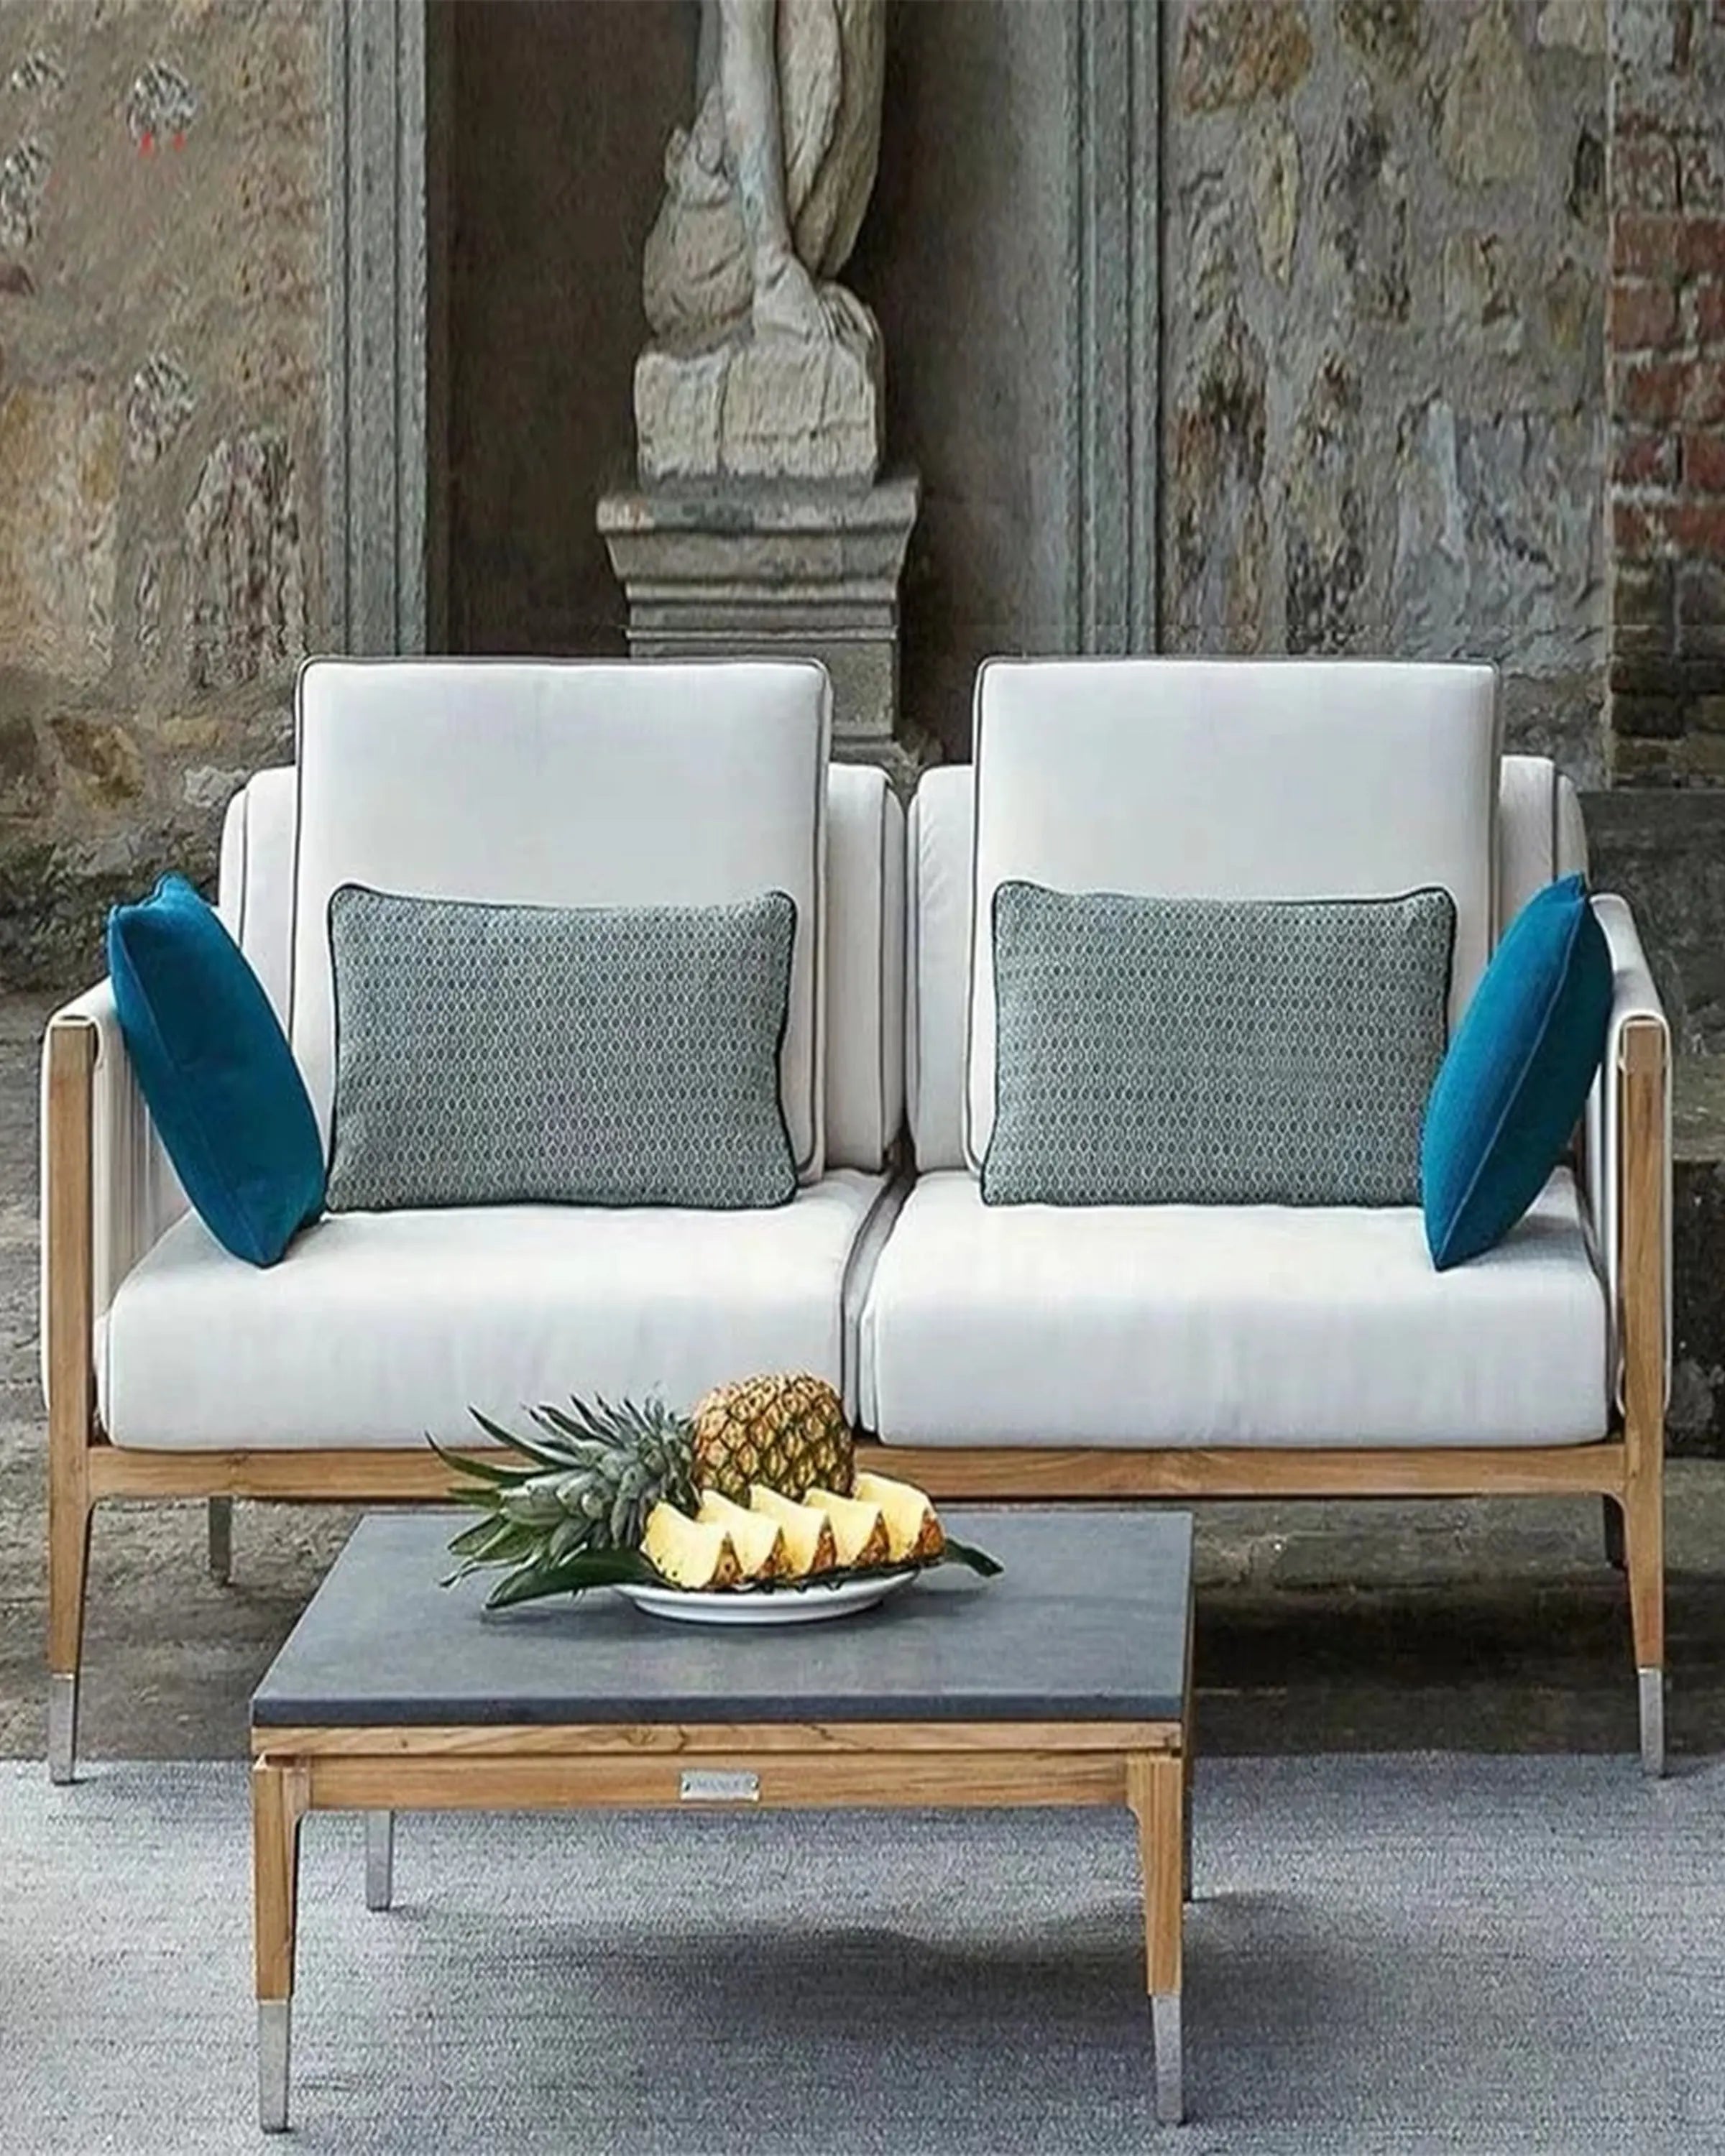 Bravo Sofa Set - Out Door Furniture ANGIE HOMES